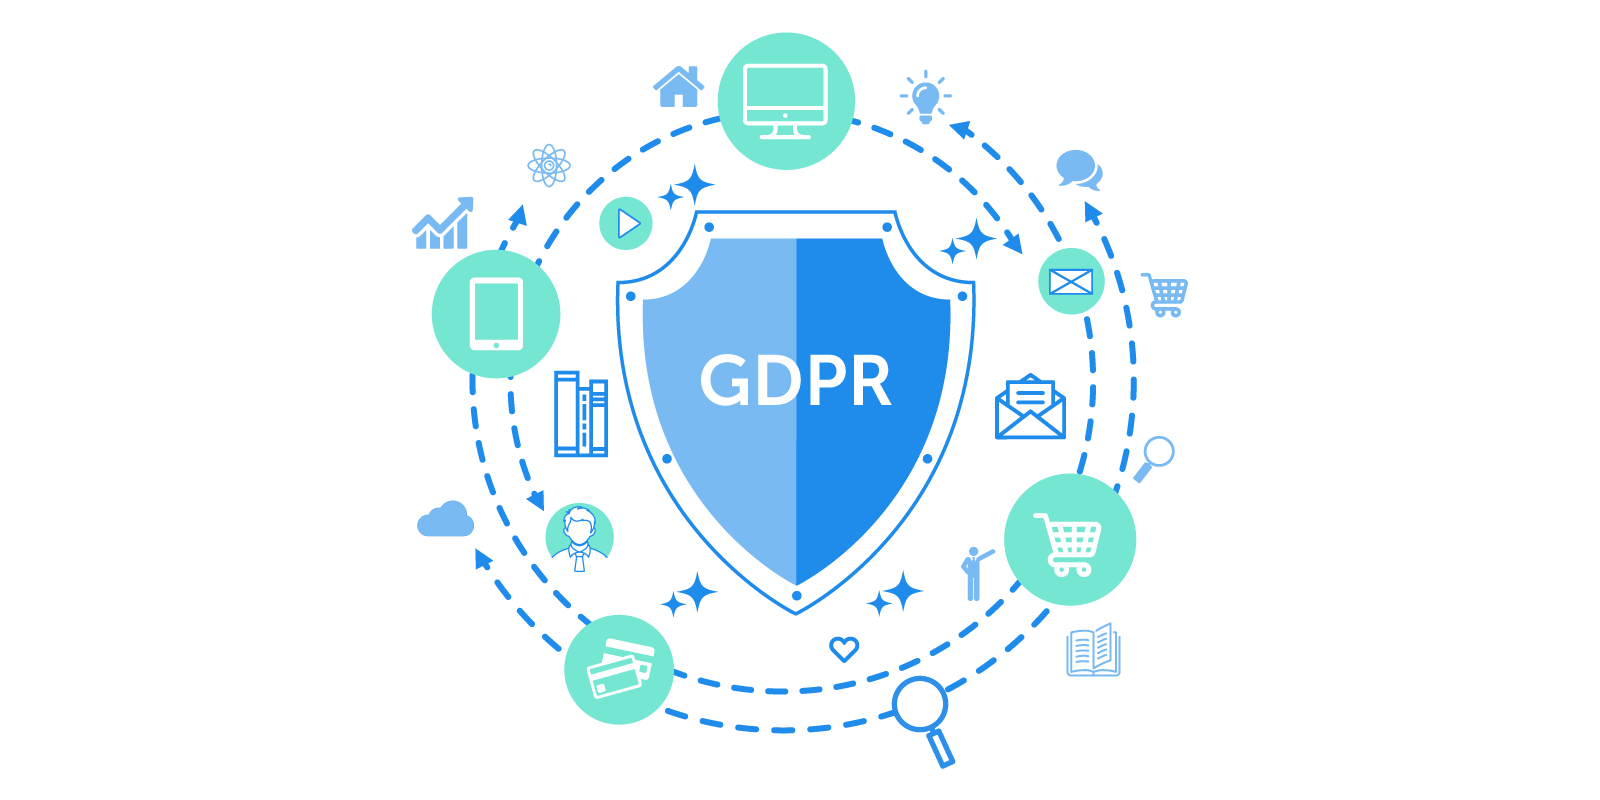 what is gdpr?